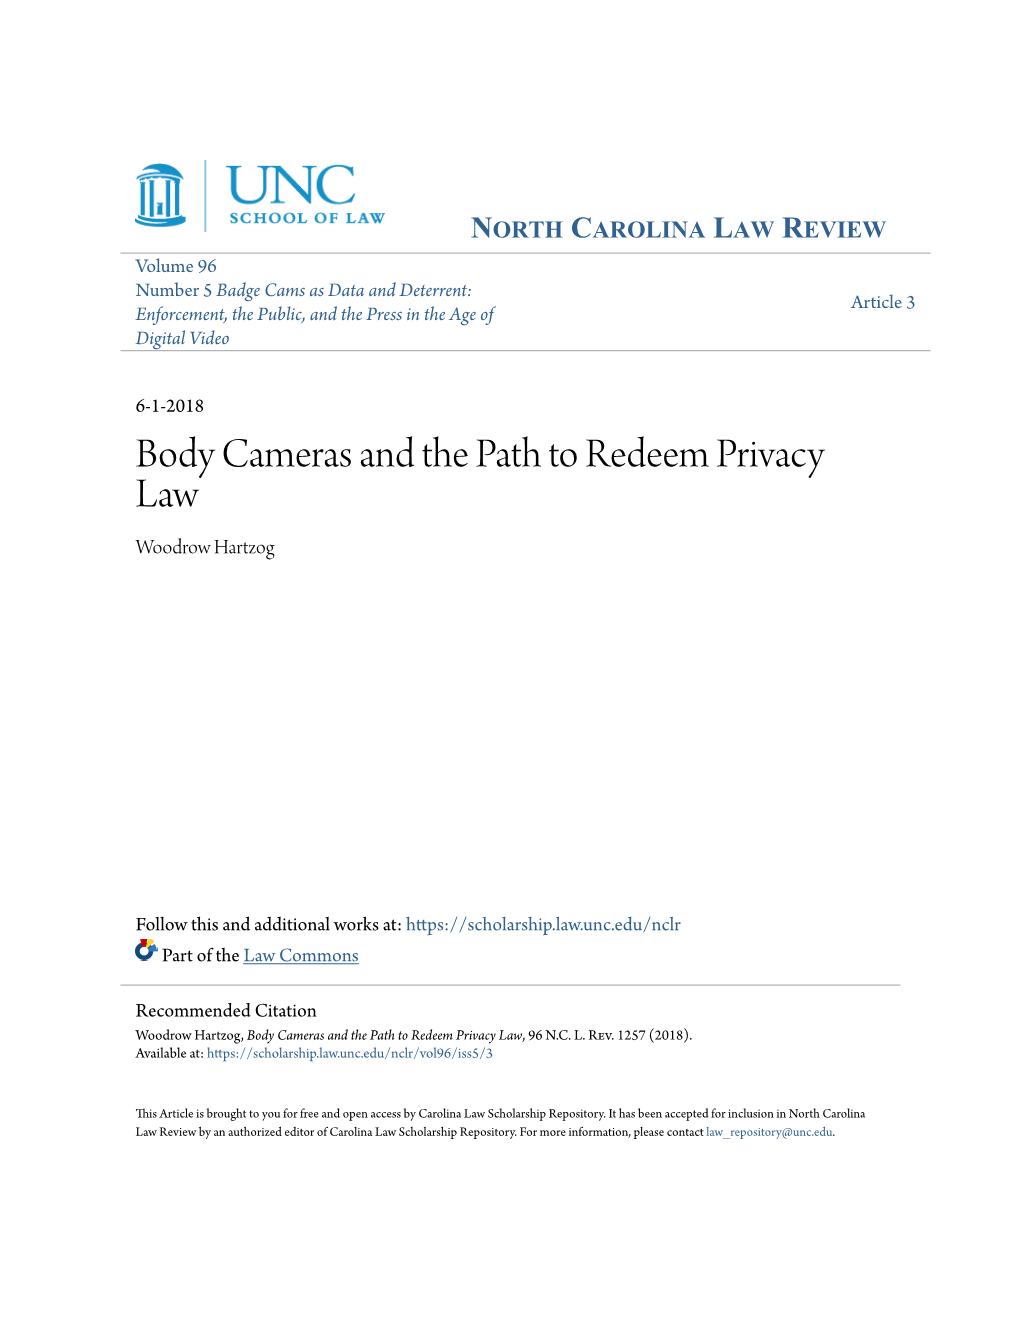 Body Cameras and the Path to Redeem Privacy Law Woodrow Hartzog